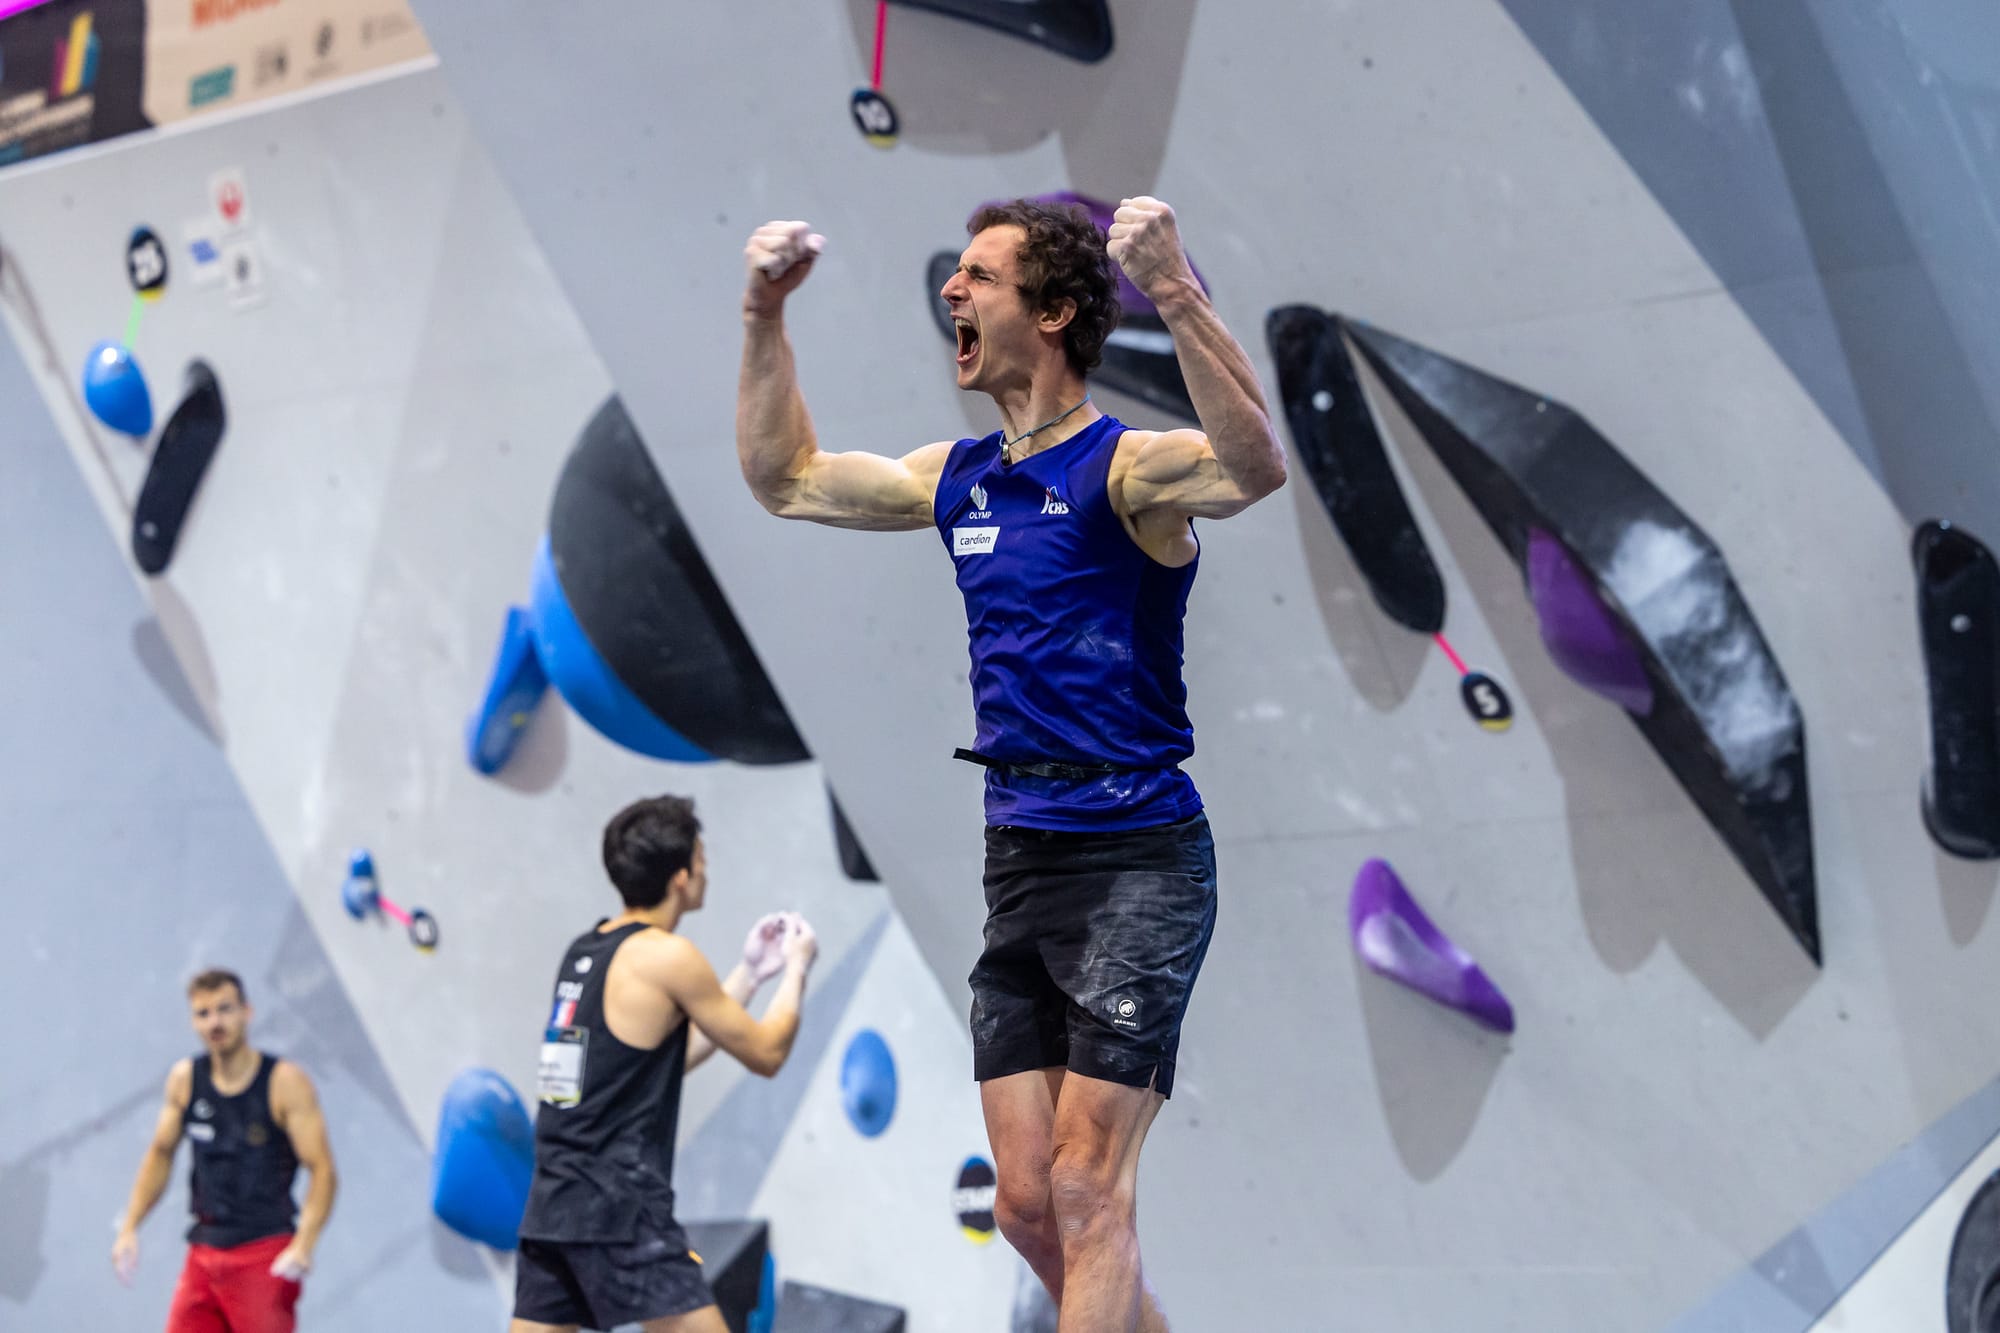 Adam Ondra celebrating topping a boulder in the Combined Semi-final Boulder round.